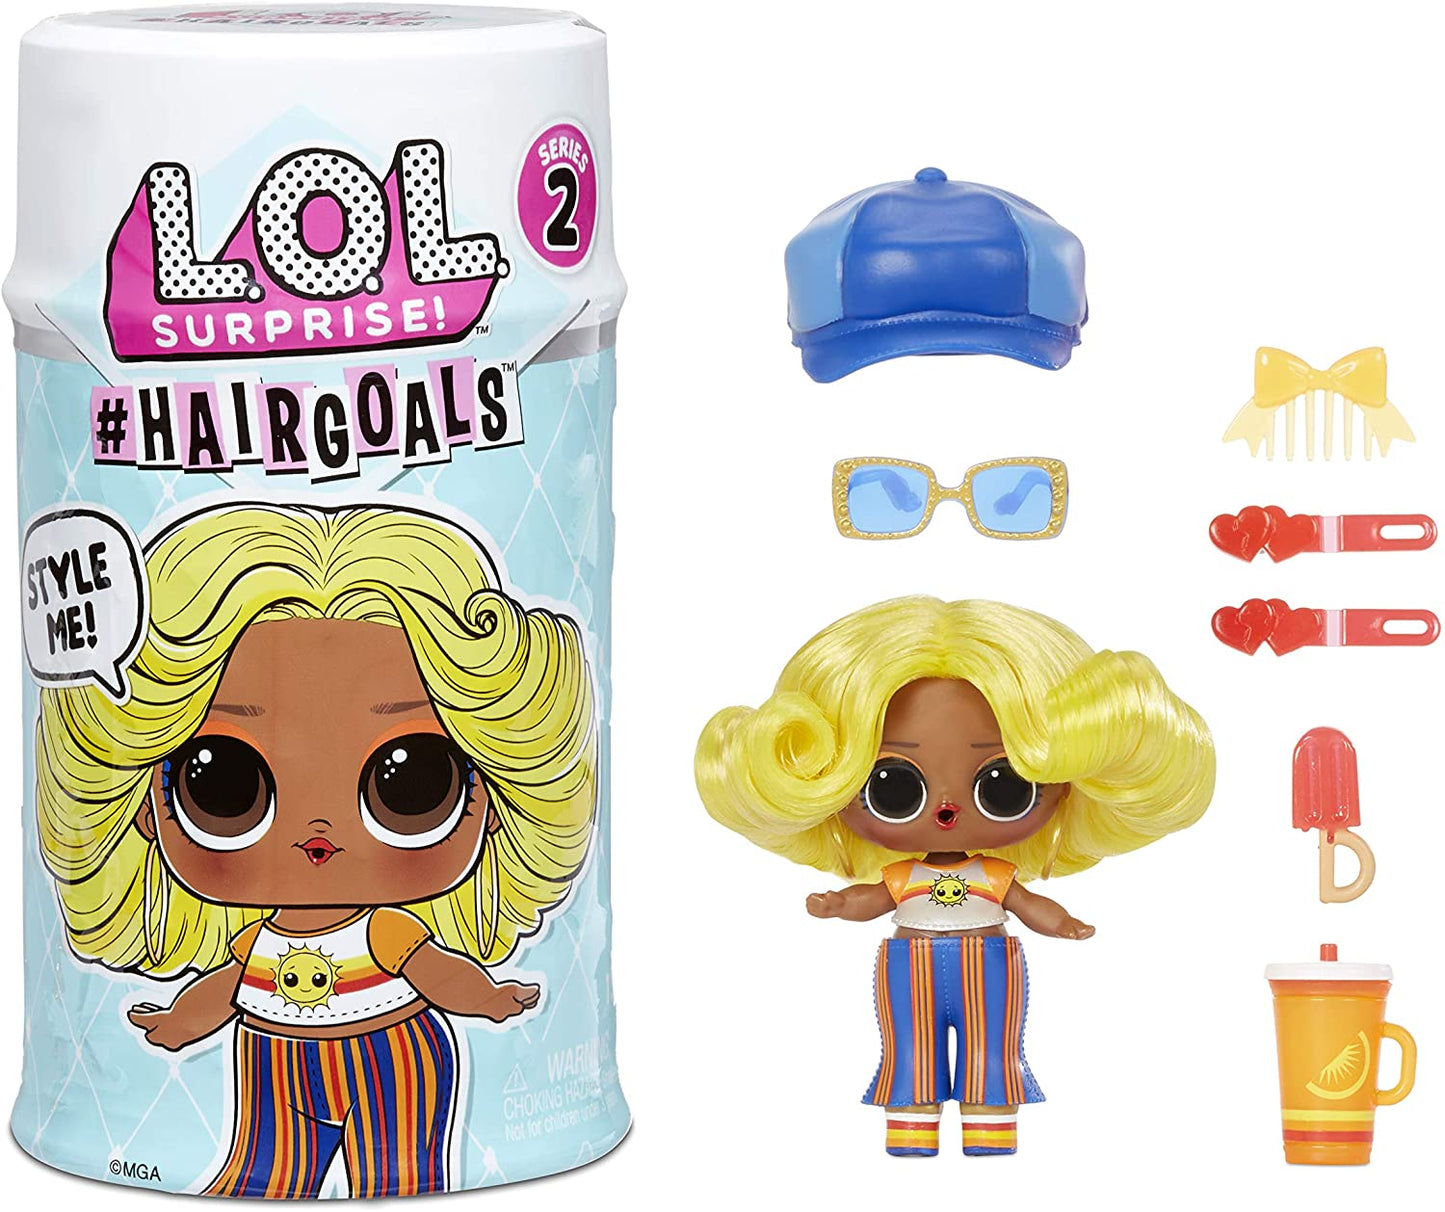 LOL Surprise Hairgoals Series 2 Doll with Real Hair and 15 Surprises, Accessories, Surprise Dolls